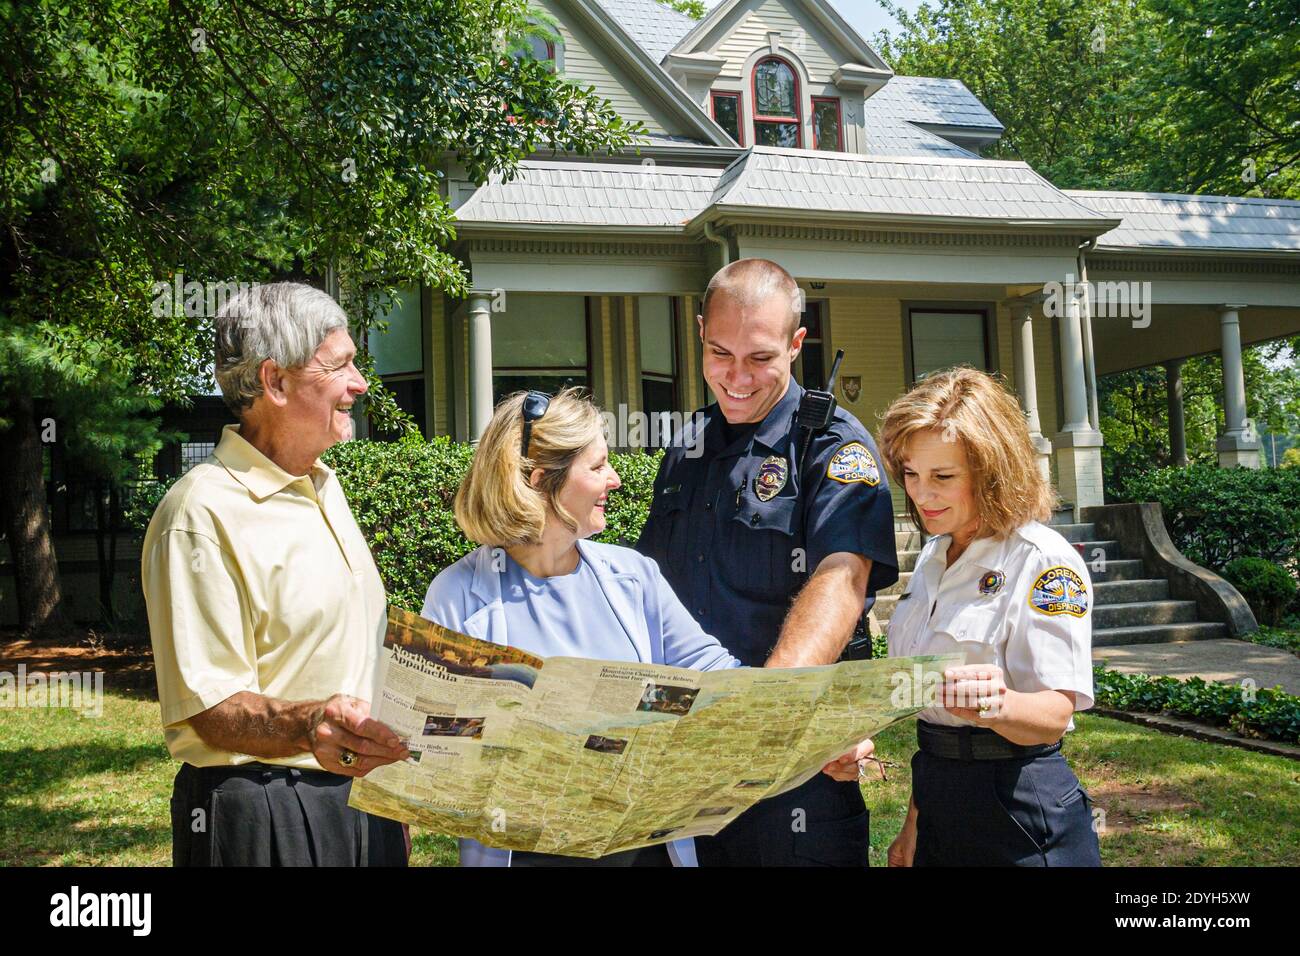 Alabama Florence Kennedy Douglass Center for the Arts,outside exterior police giving directions man woman female couple visiting visitors, Stock Photo